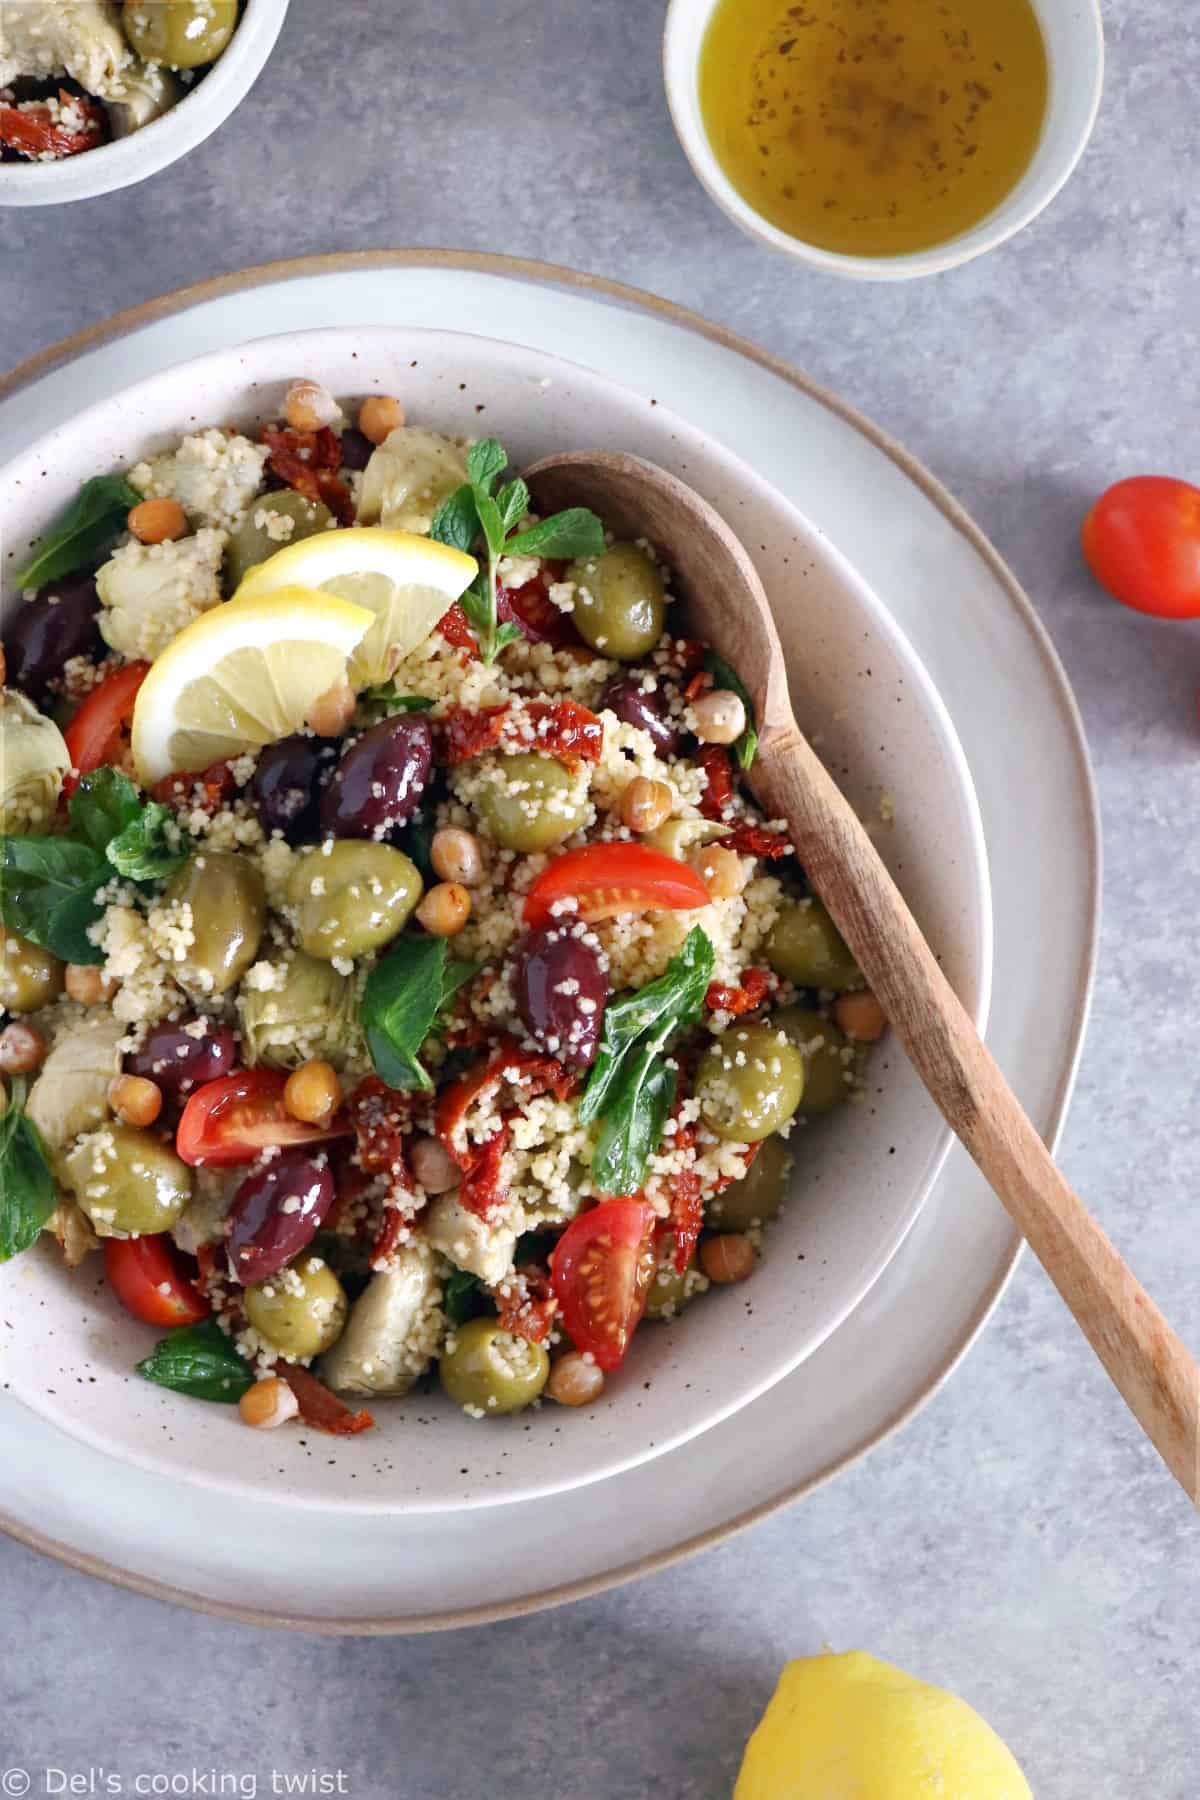 Add some sun to your plate with this easy Mediterranean couscous salad with chickpeas, olives and artichoke hearts.